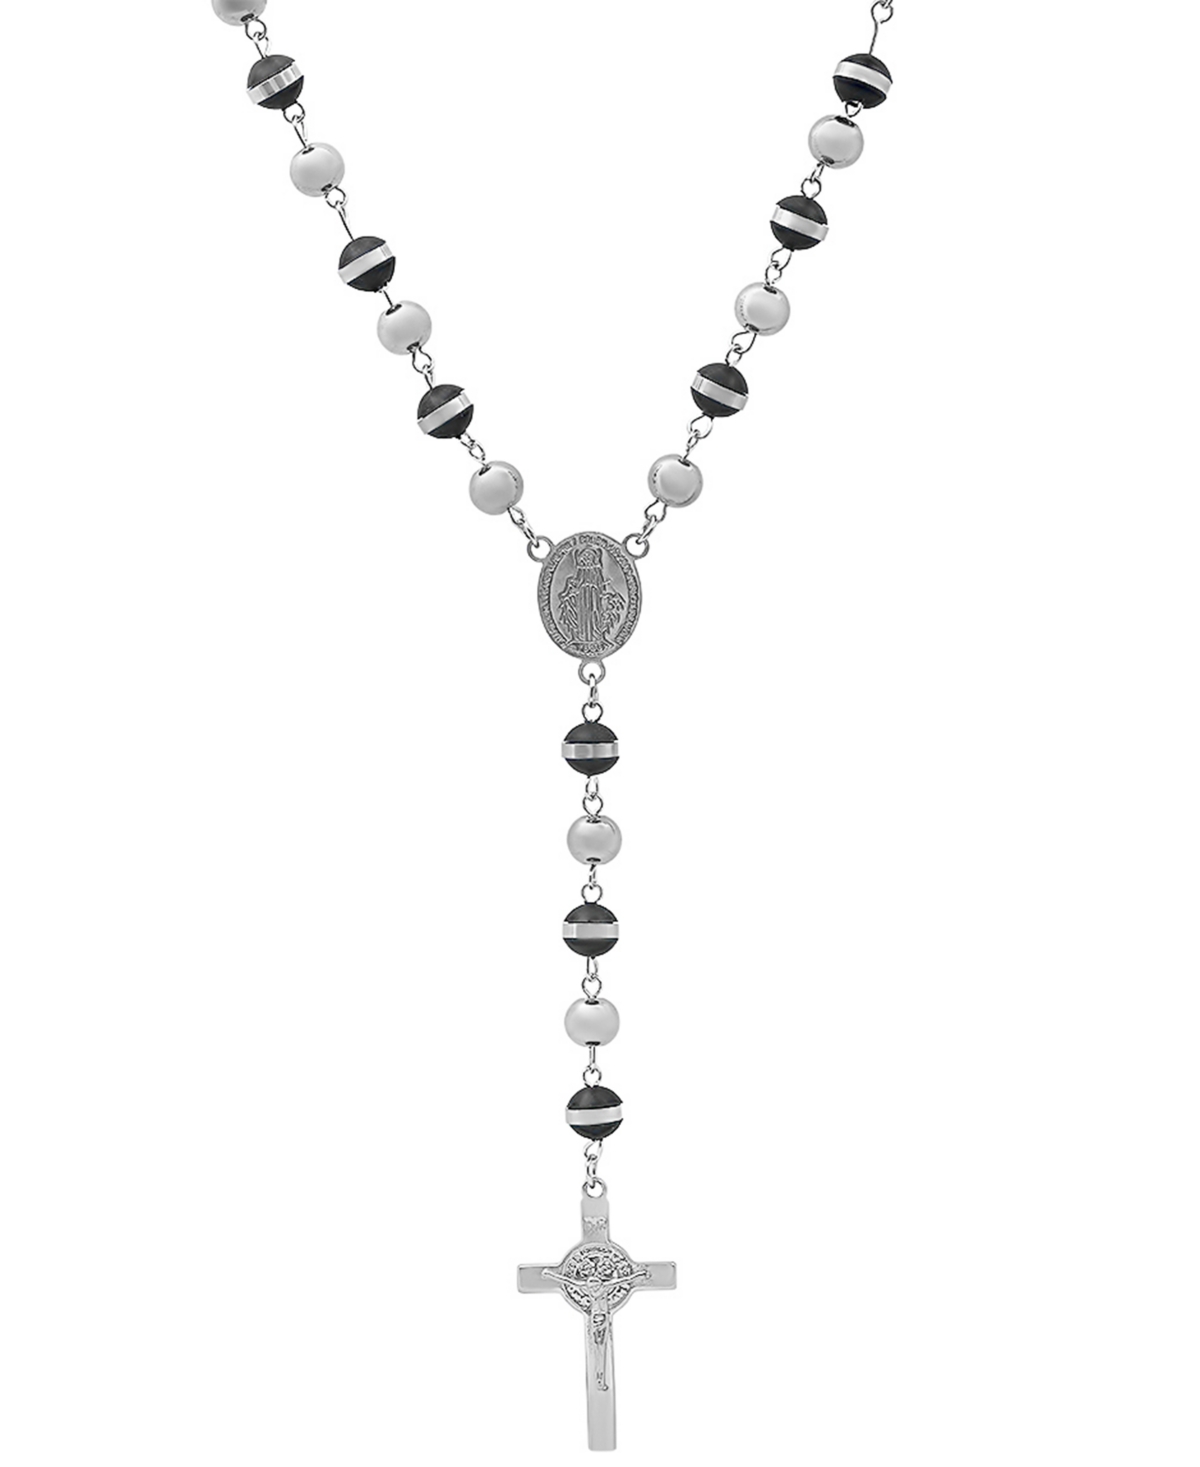 Men's Stainless Steel Prayer Rosary 28" Lariat Necklace - Silver